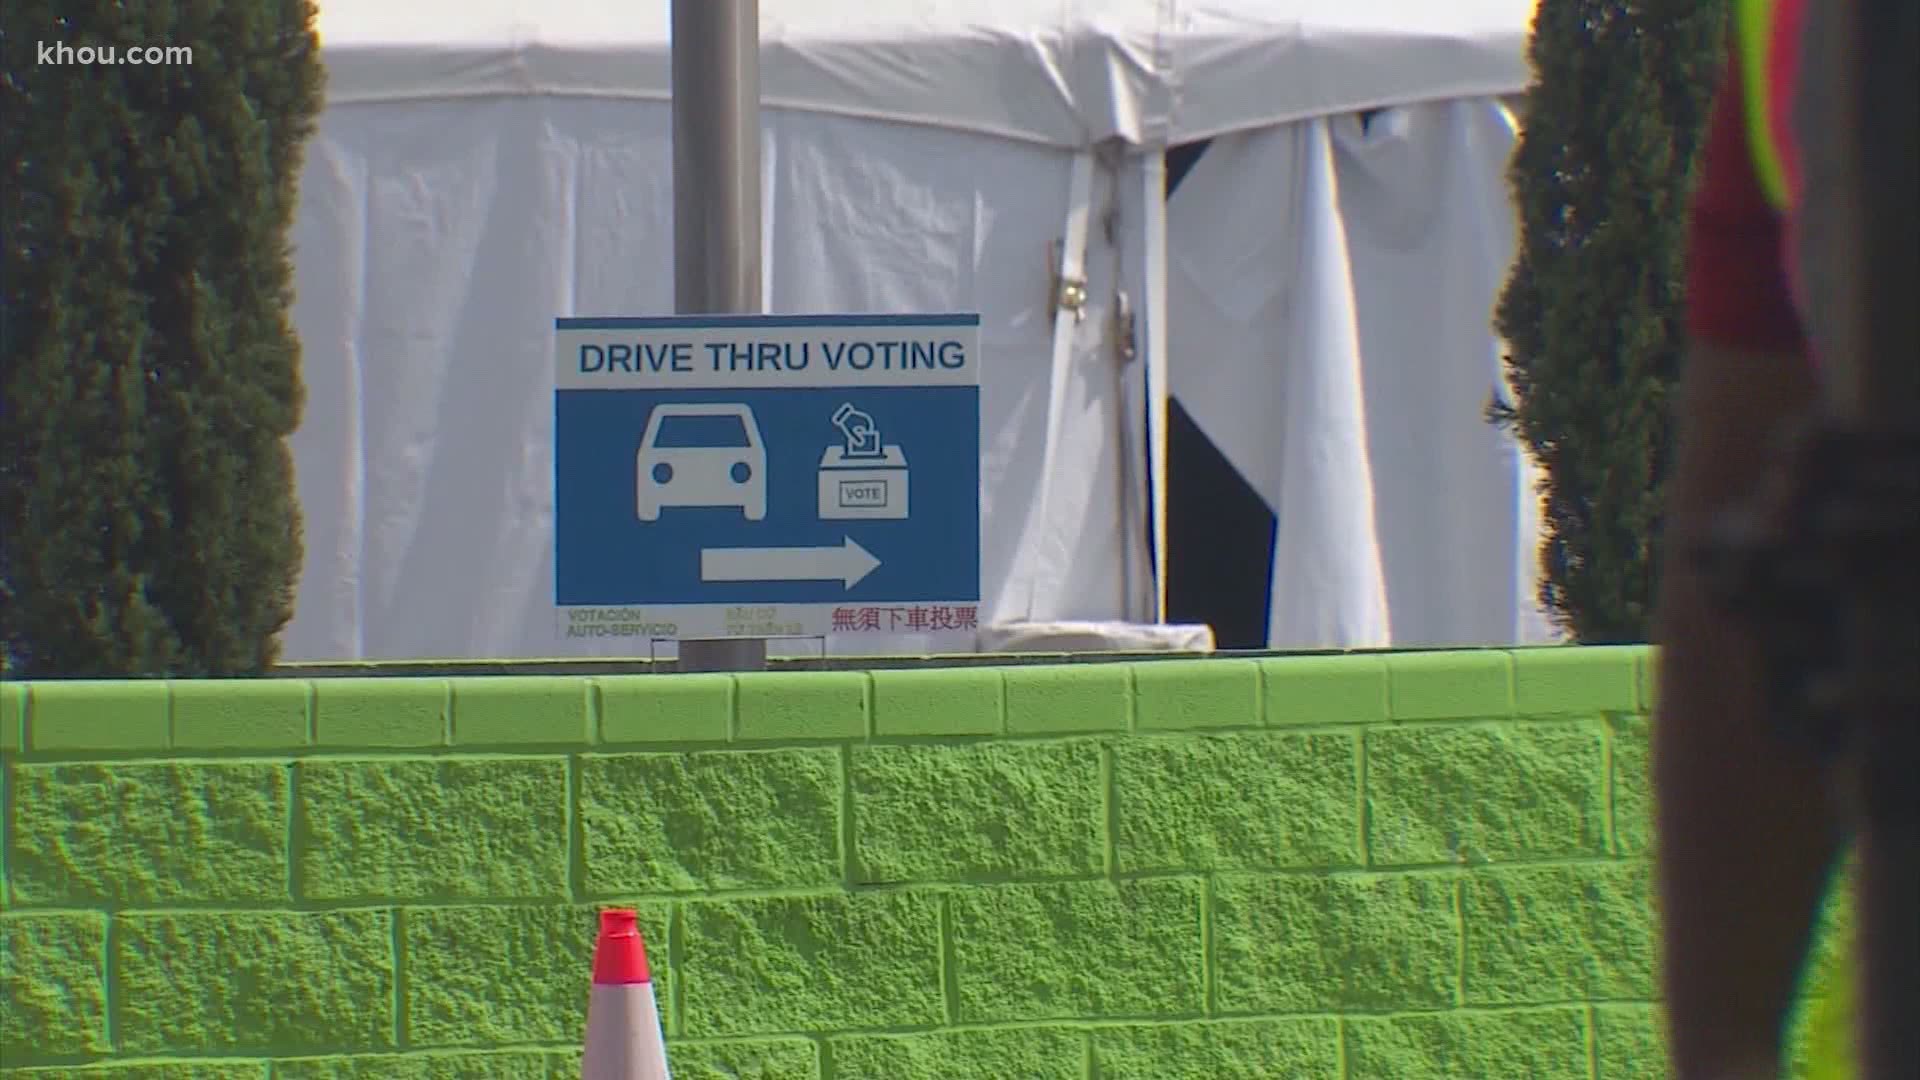 Republicans filed another lawsuit to stop drive-thru voting. The petition asks the court to reject votes already cast through drive-thru voting.